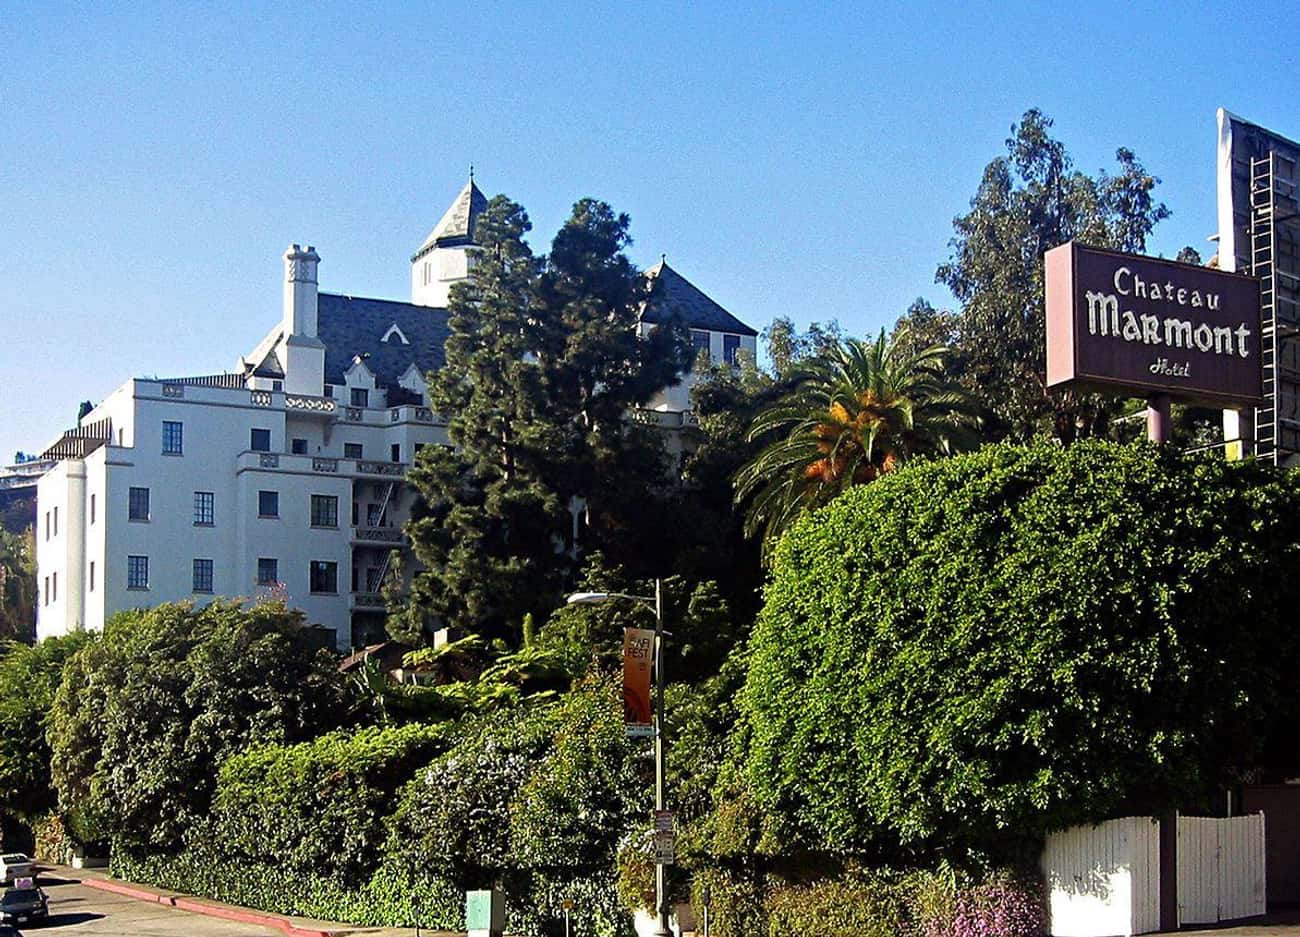 Hollywood Misbehaved At The Chateau Marmont